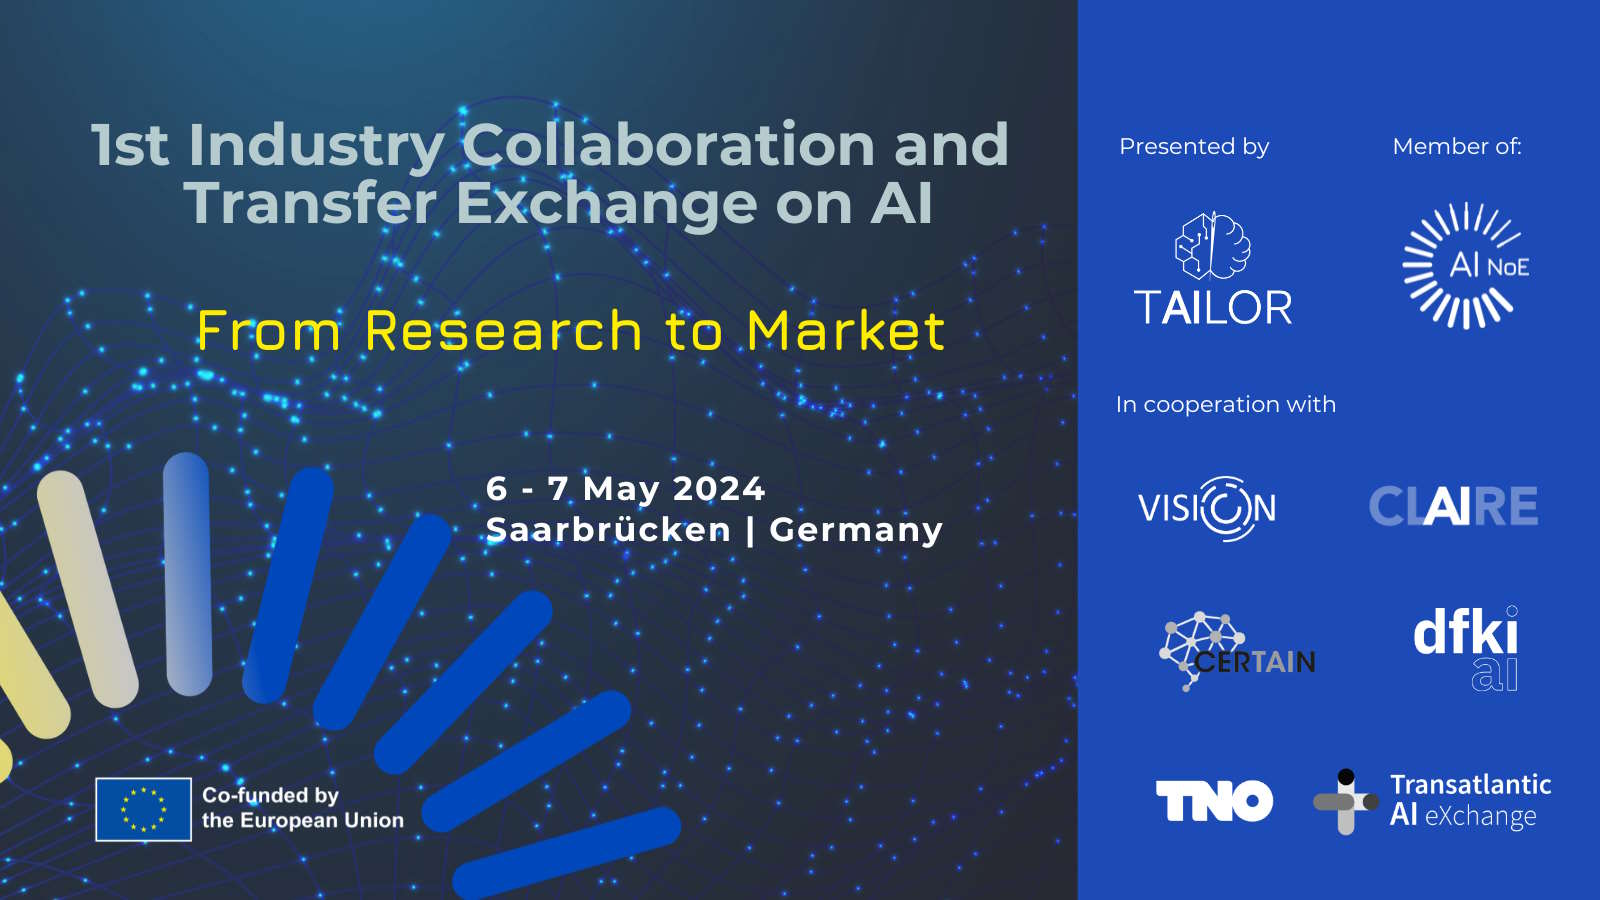 1st Industry Collaboration and Transfer Exchange on AI – “From Research to Market”